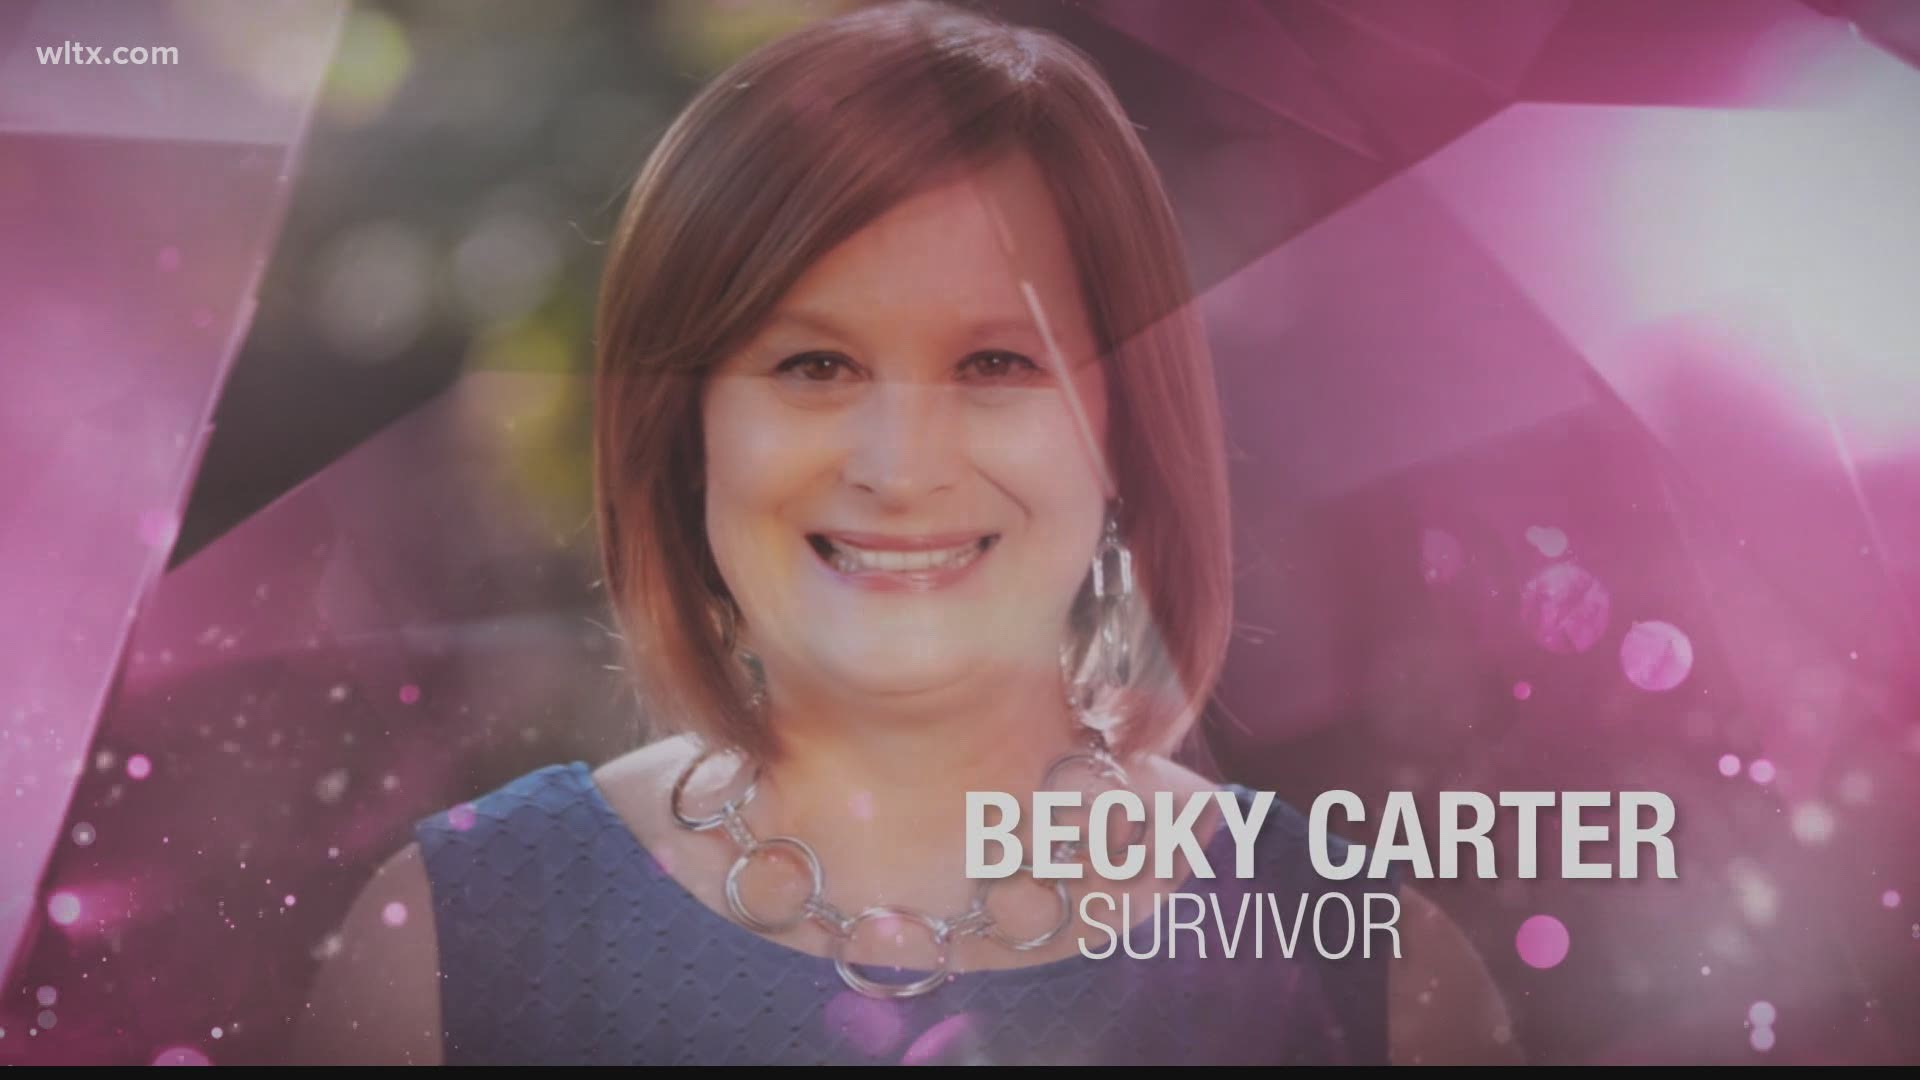 Every year more than 250,000 women are diagonsed with breast cancer and 42,000 will die.  Here is a survivor's story.